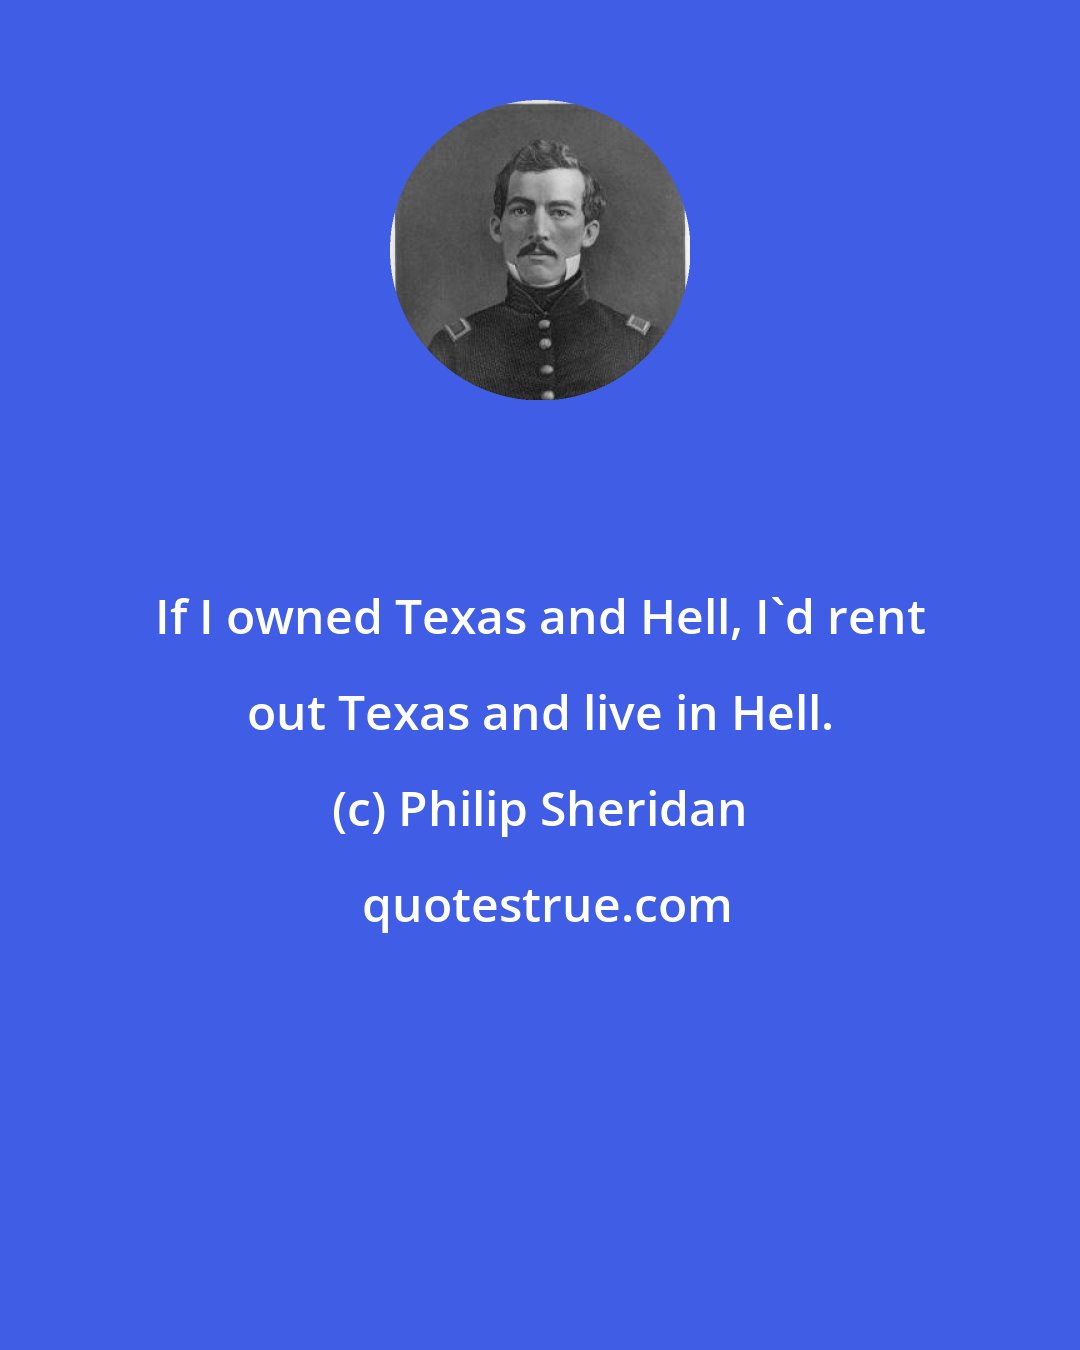 Philip Sheridan: If I owned Texas and Hell, I'd rent out Texas and live in Hell.